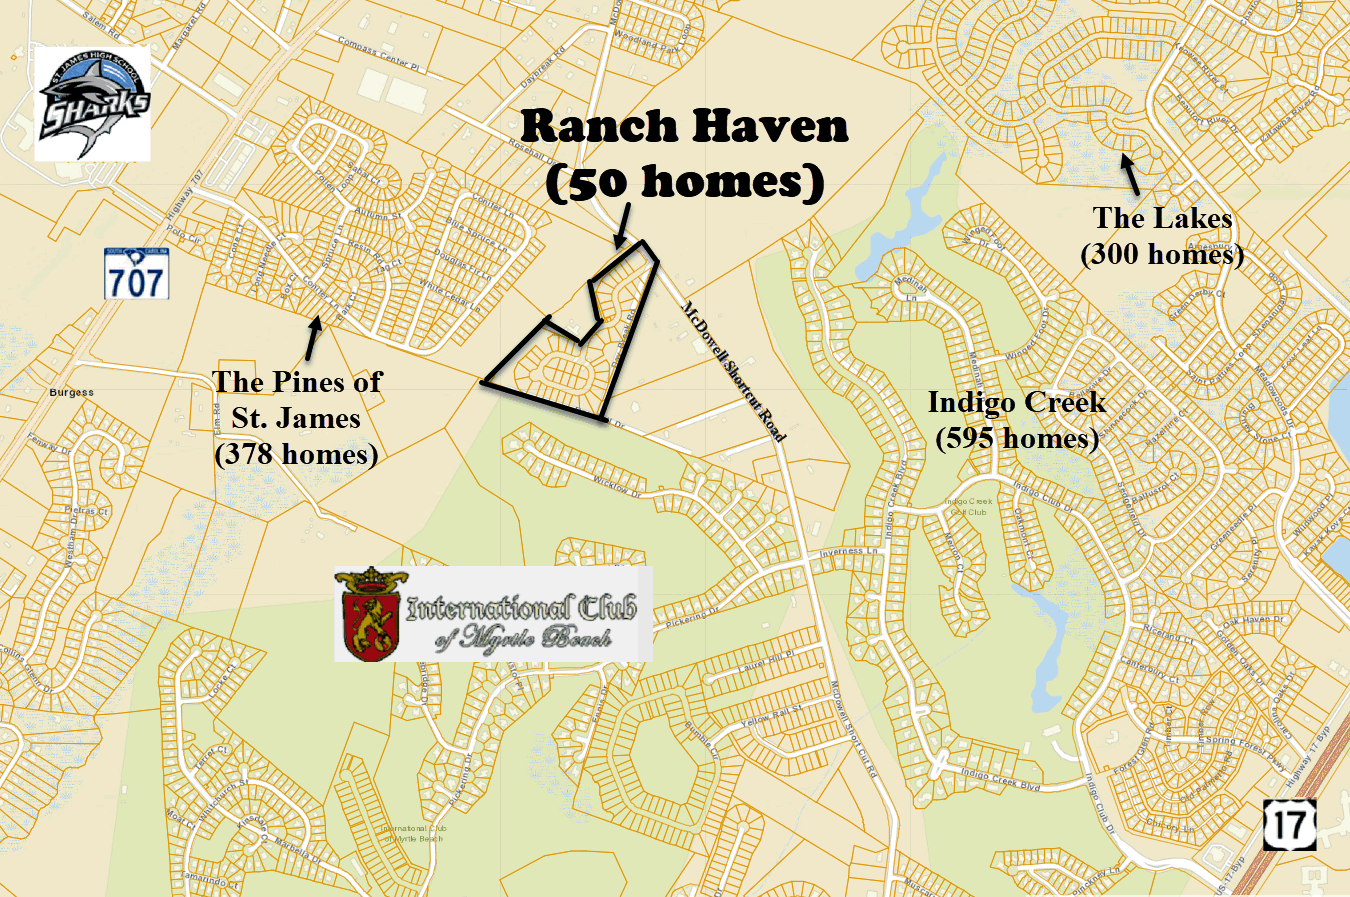 New home community of Ranch Haven in Murrells Inlet